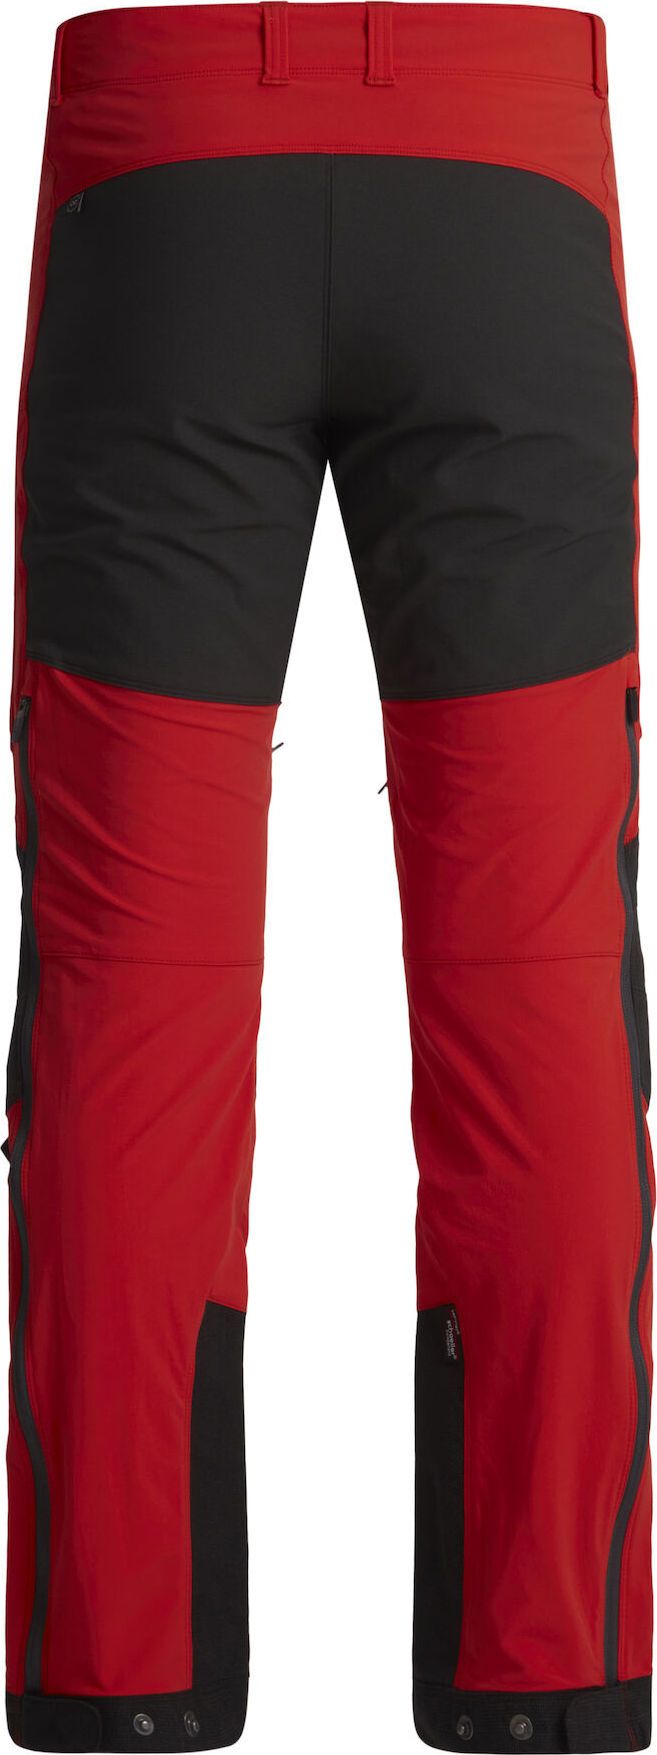 Men's Askro Pro Pant Lively Red/Charcoal Lundhags